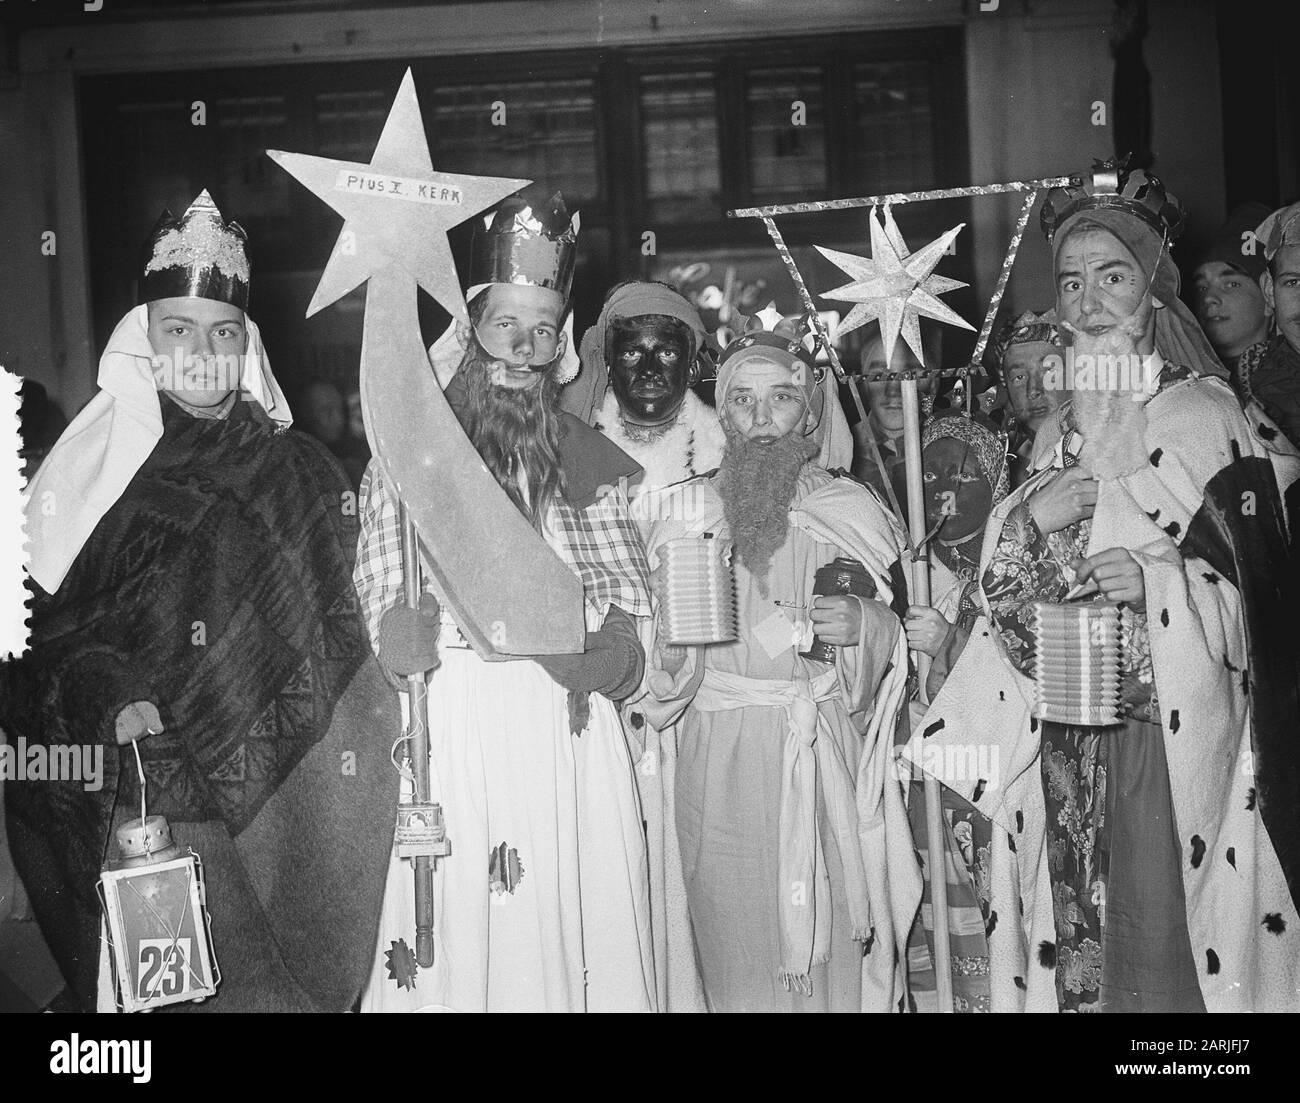 Epiphany parade by Eindhoven Date: 5 January 1955 Location: Eindhoven, Noord-Brabant Keywords: Epiphany, Parades, Stars Stock Photo